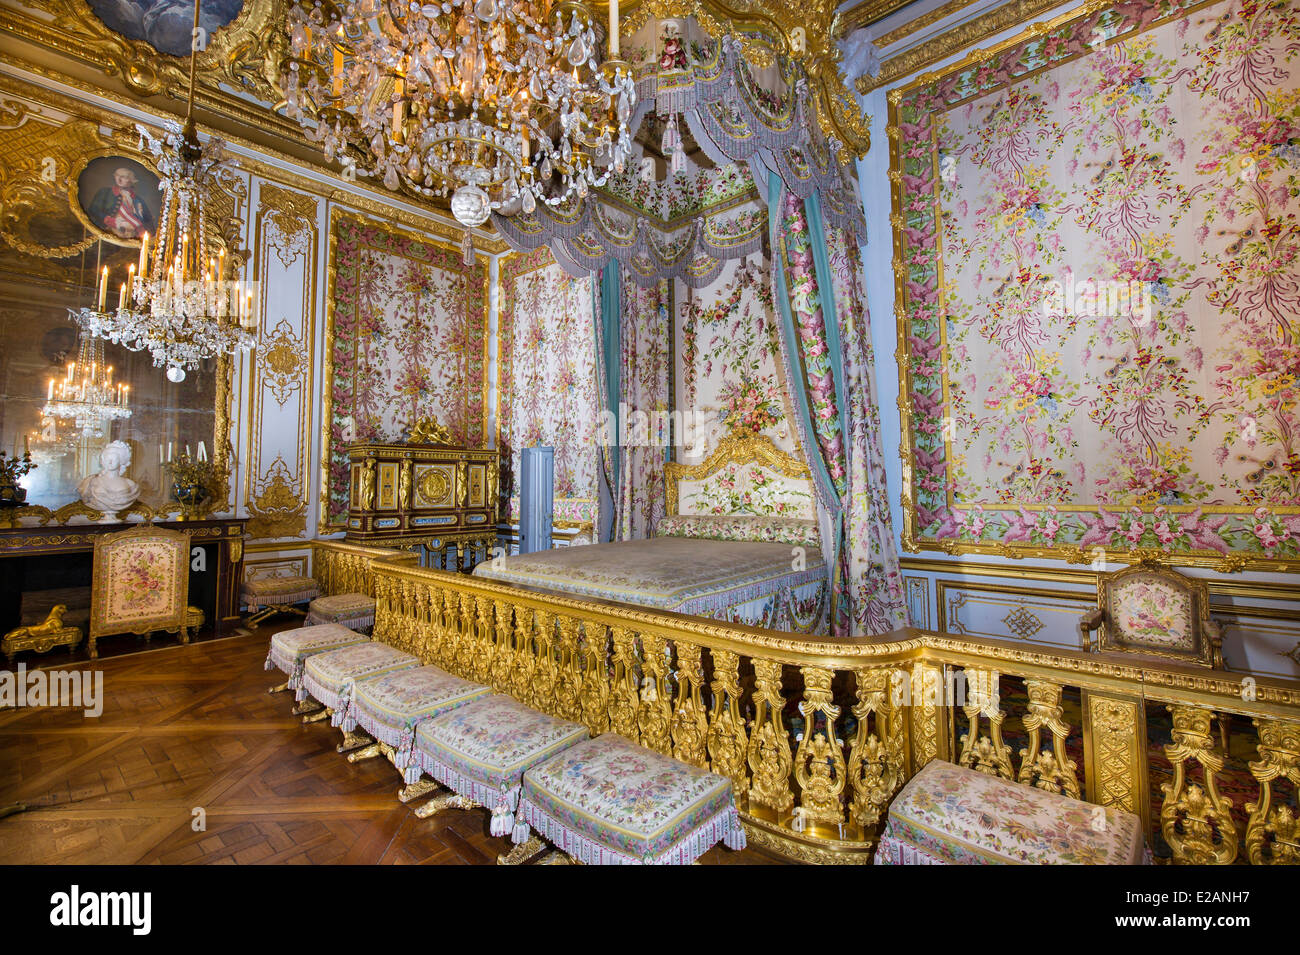 /France, Yvelines, Chateau de Versailles, listed as World Heritage by UNESCO, Les Grands Appartements (State Apartments), the Stock Photo